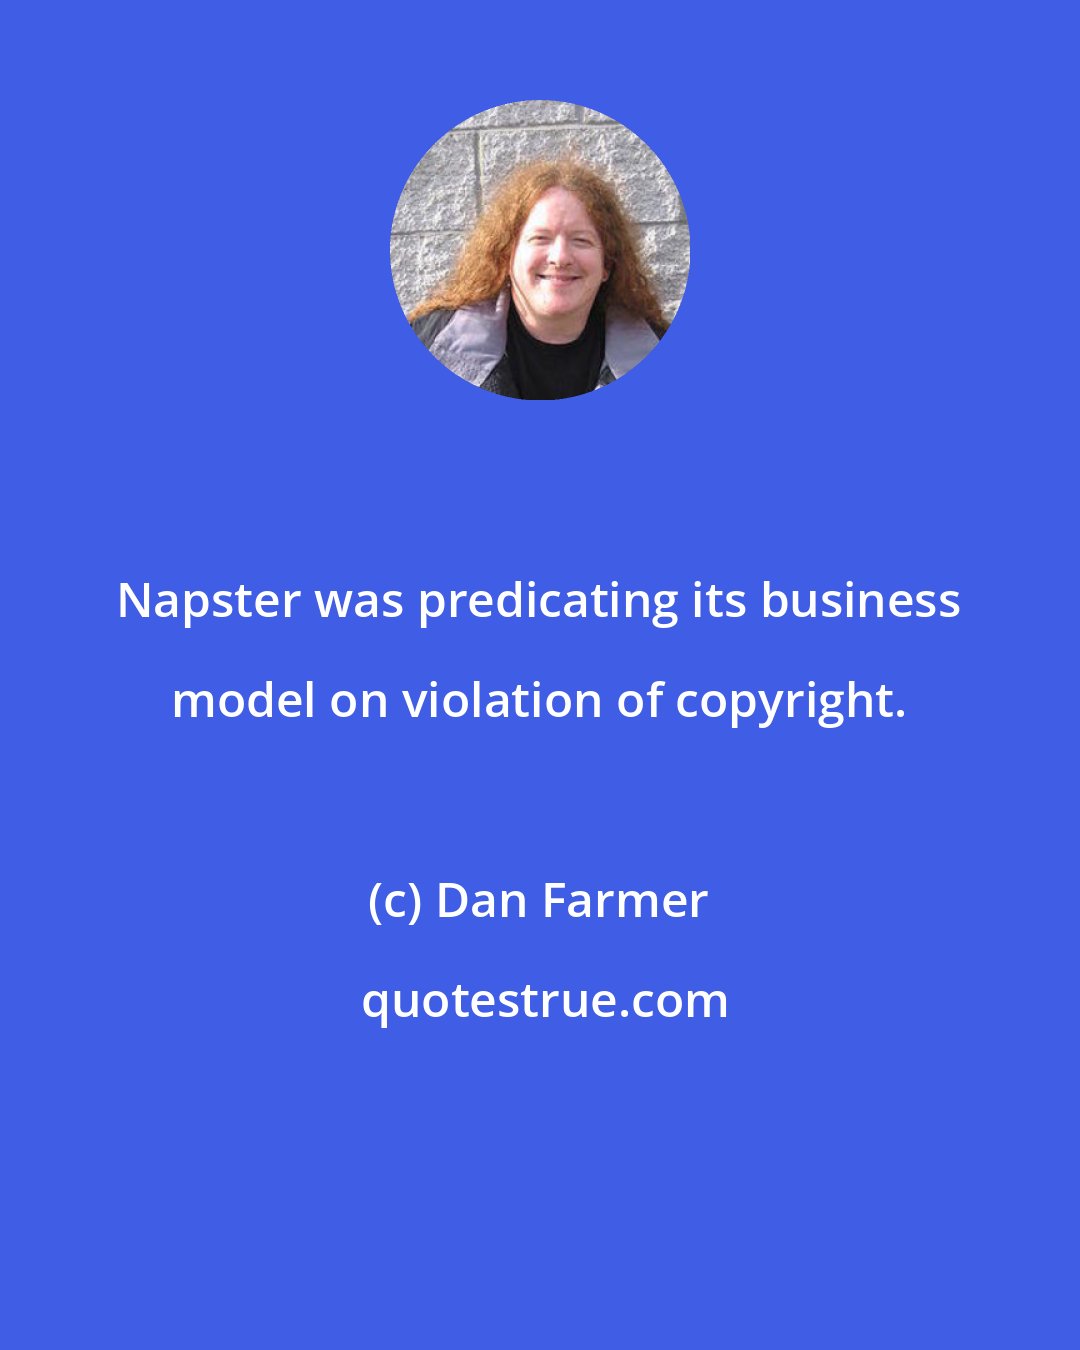 Dan Farmer: Napster was predicating its business model on violation of copyright.